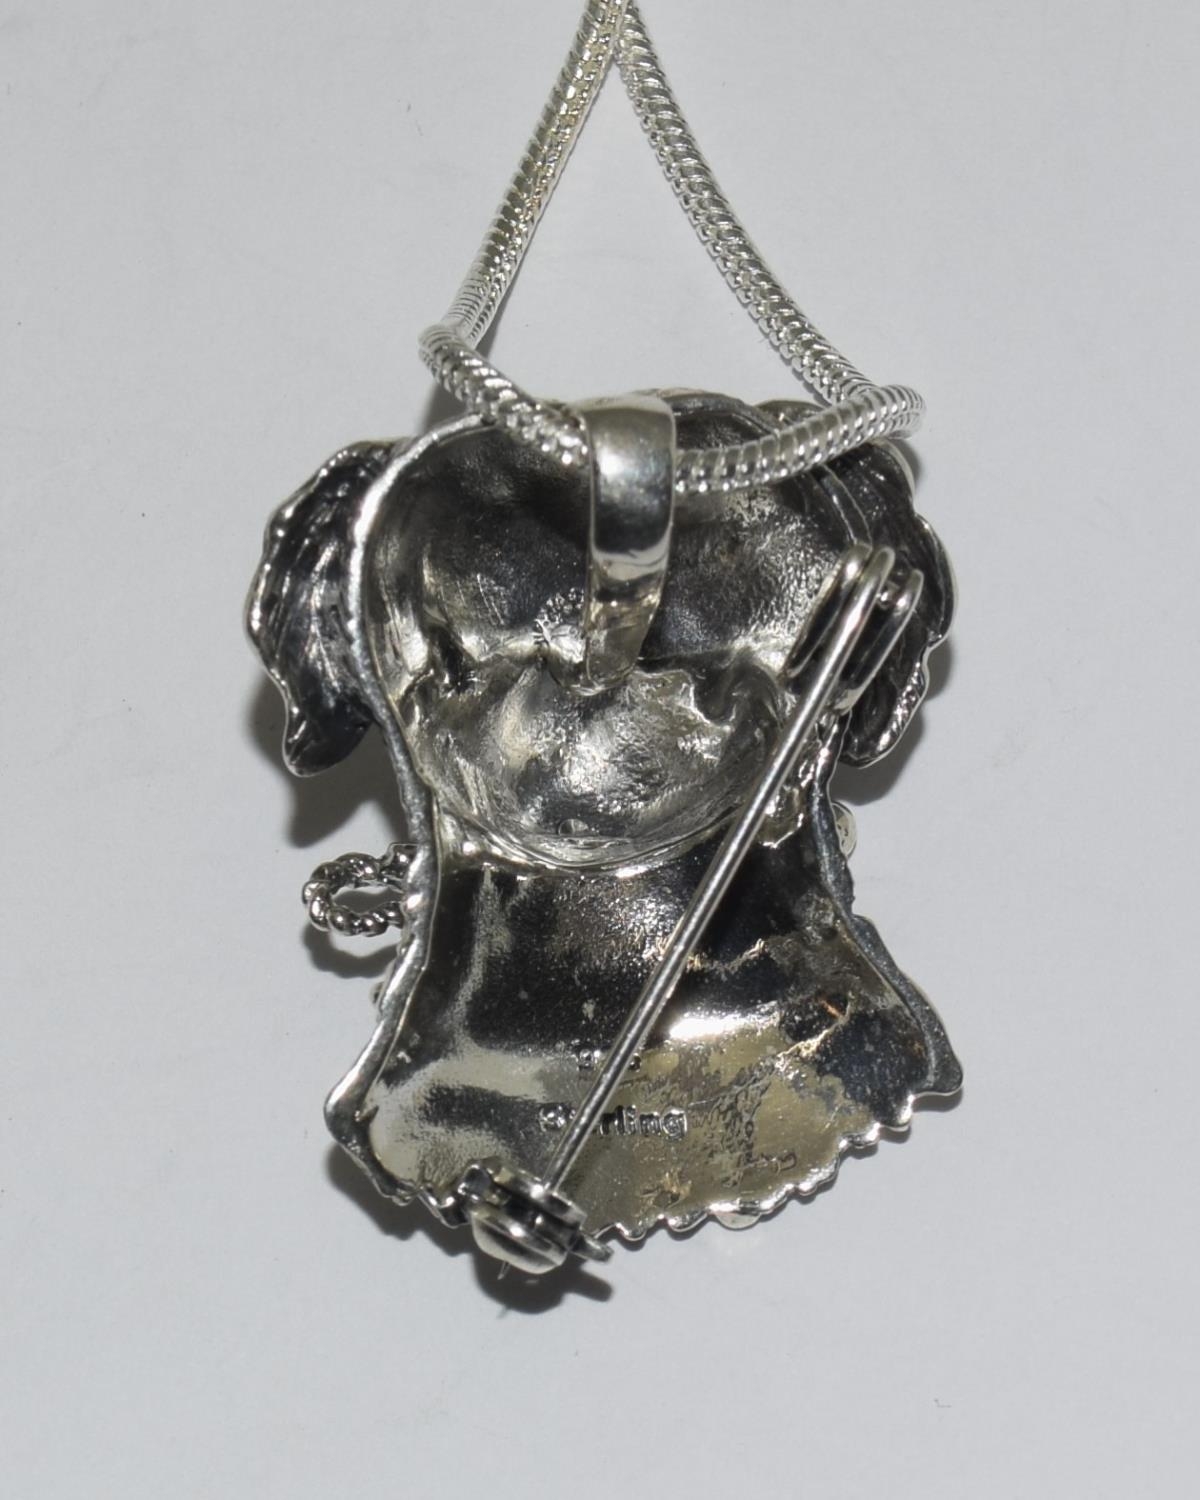 Silver dogs head necklace / brooch with glass eyes. - Image 4 of 4